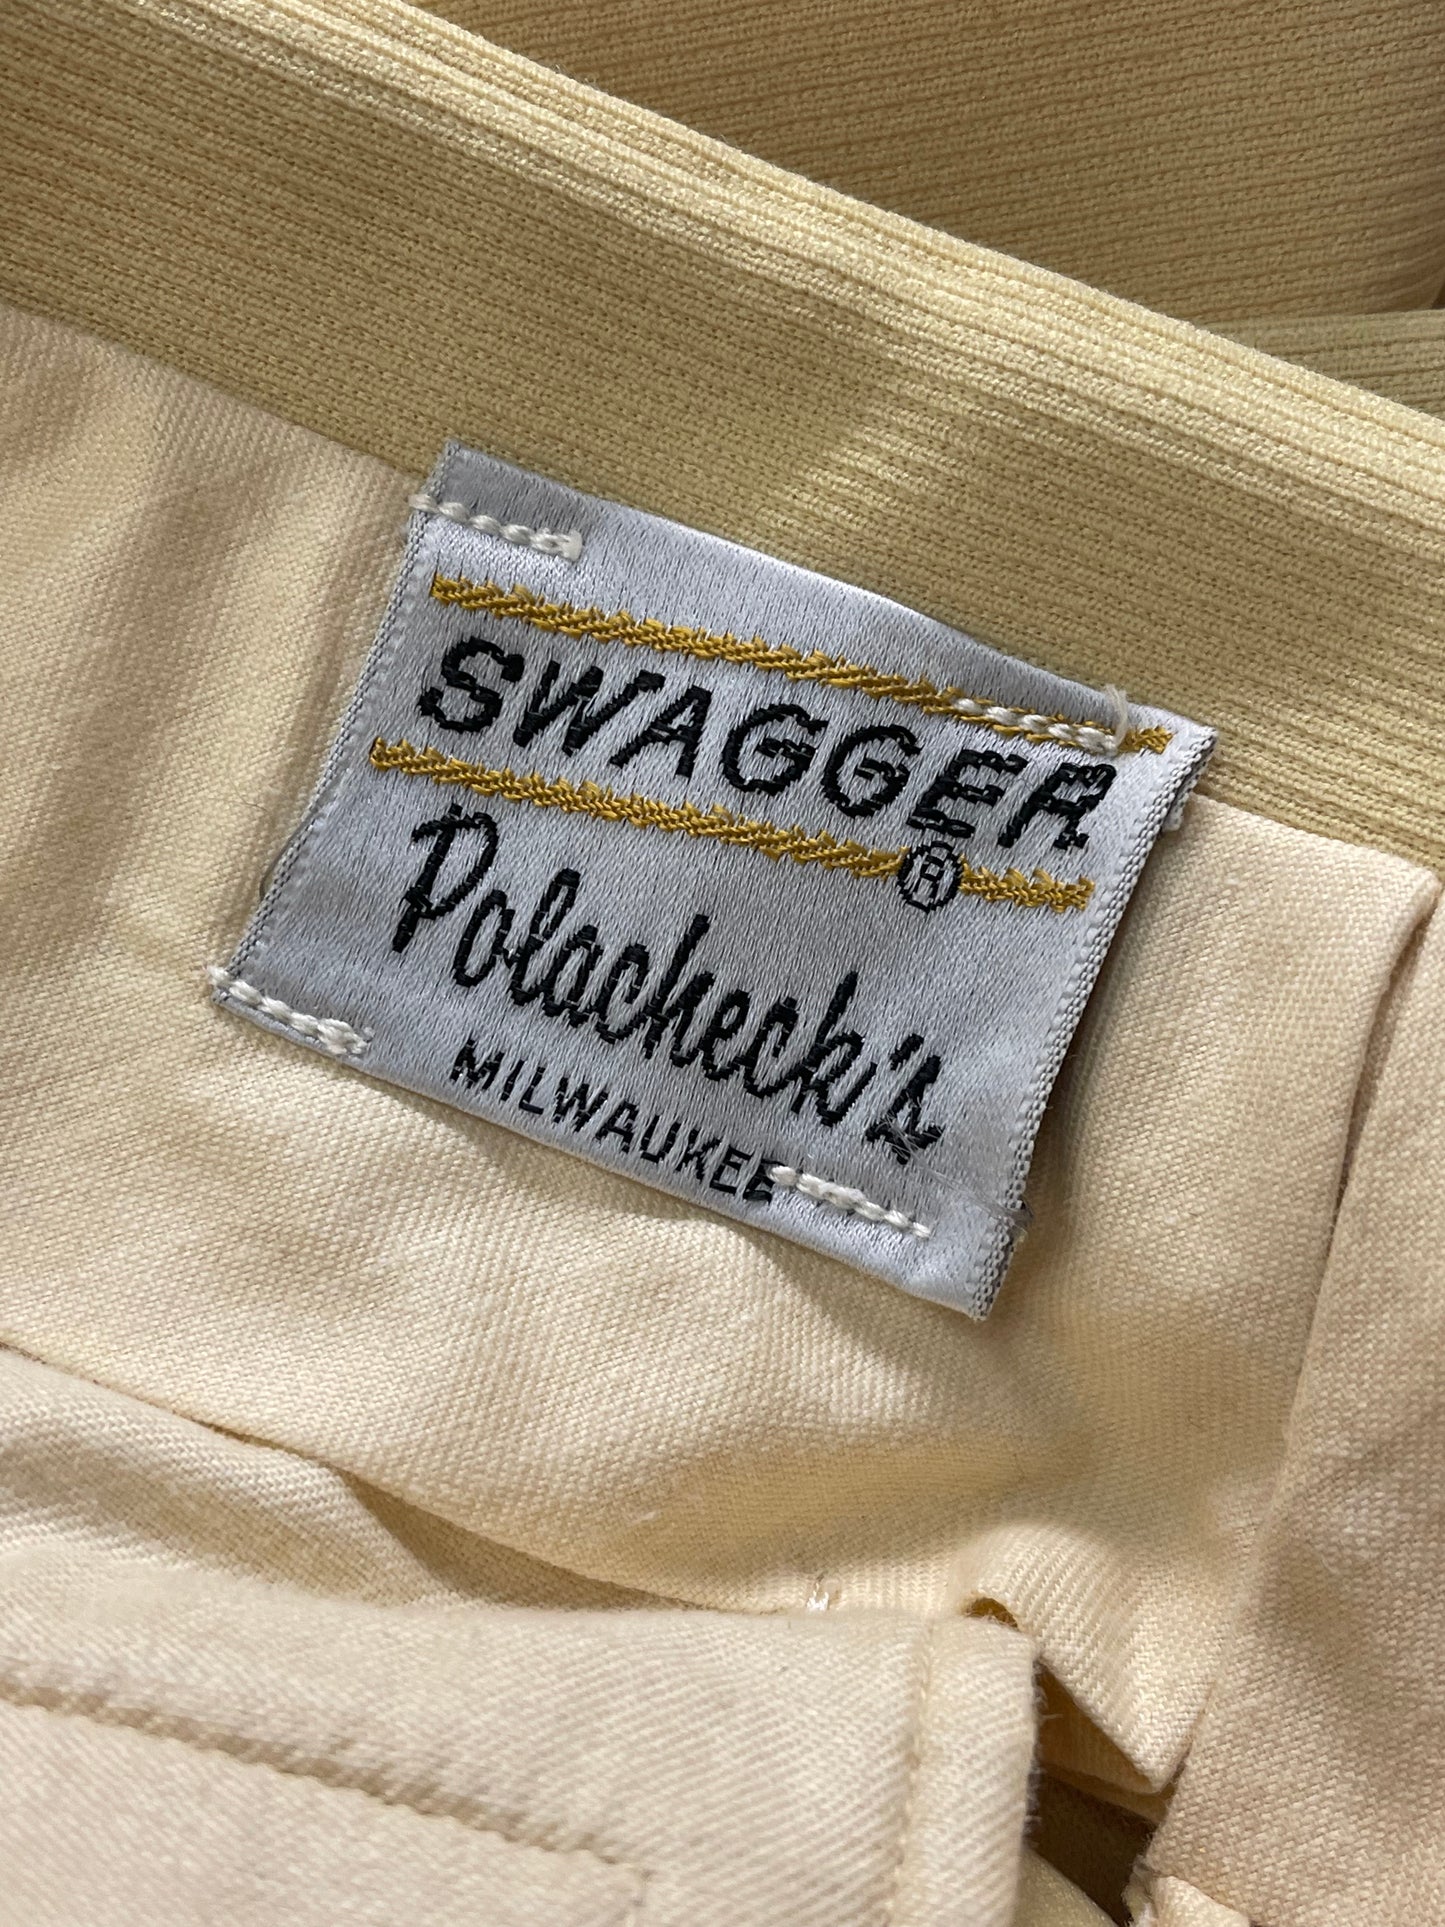 70s Polachek’s Department Store Yellow “Swagger” Pants